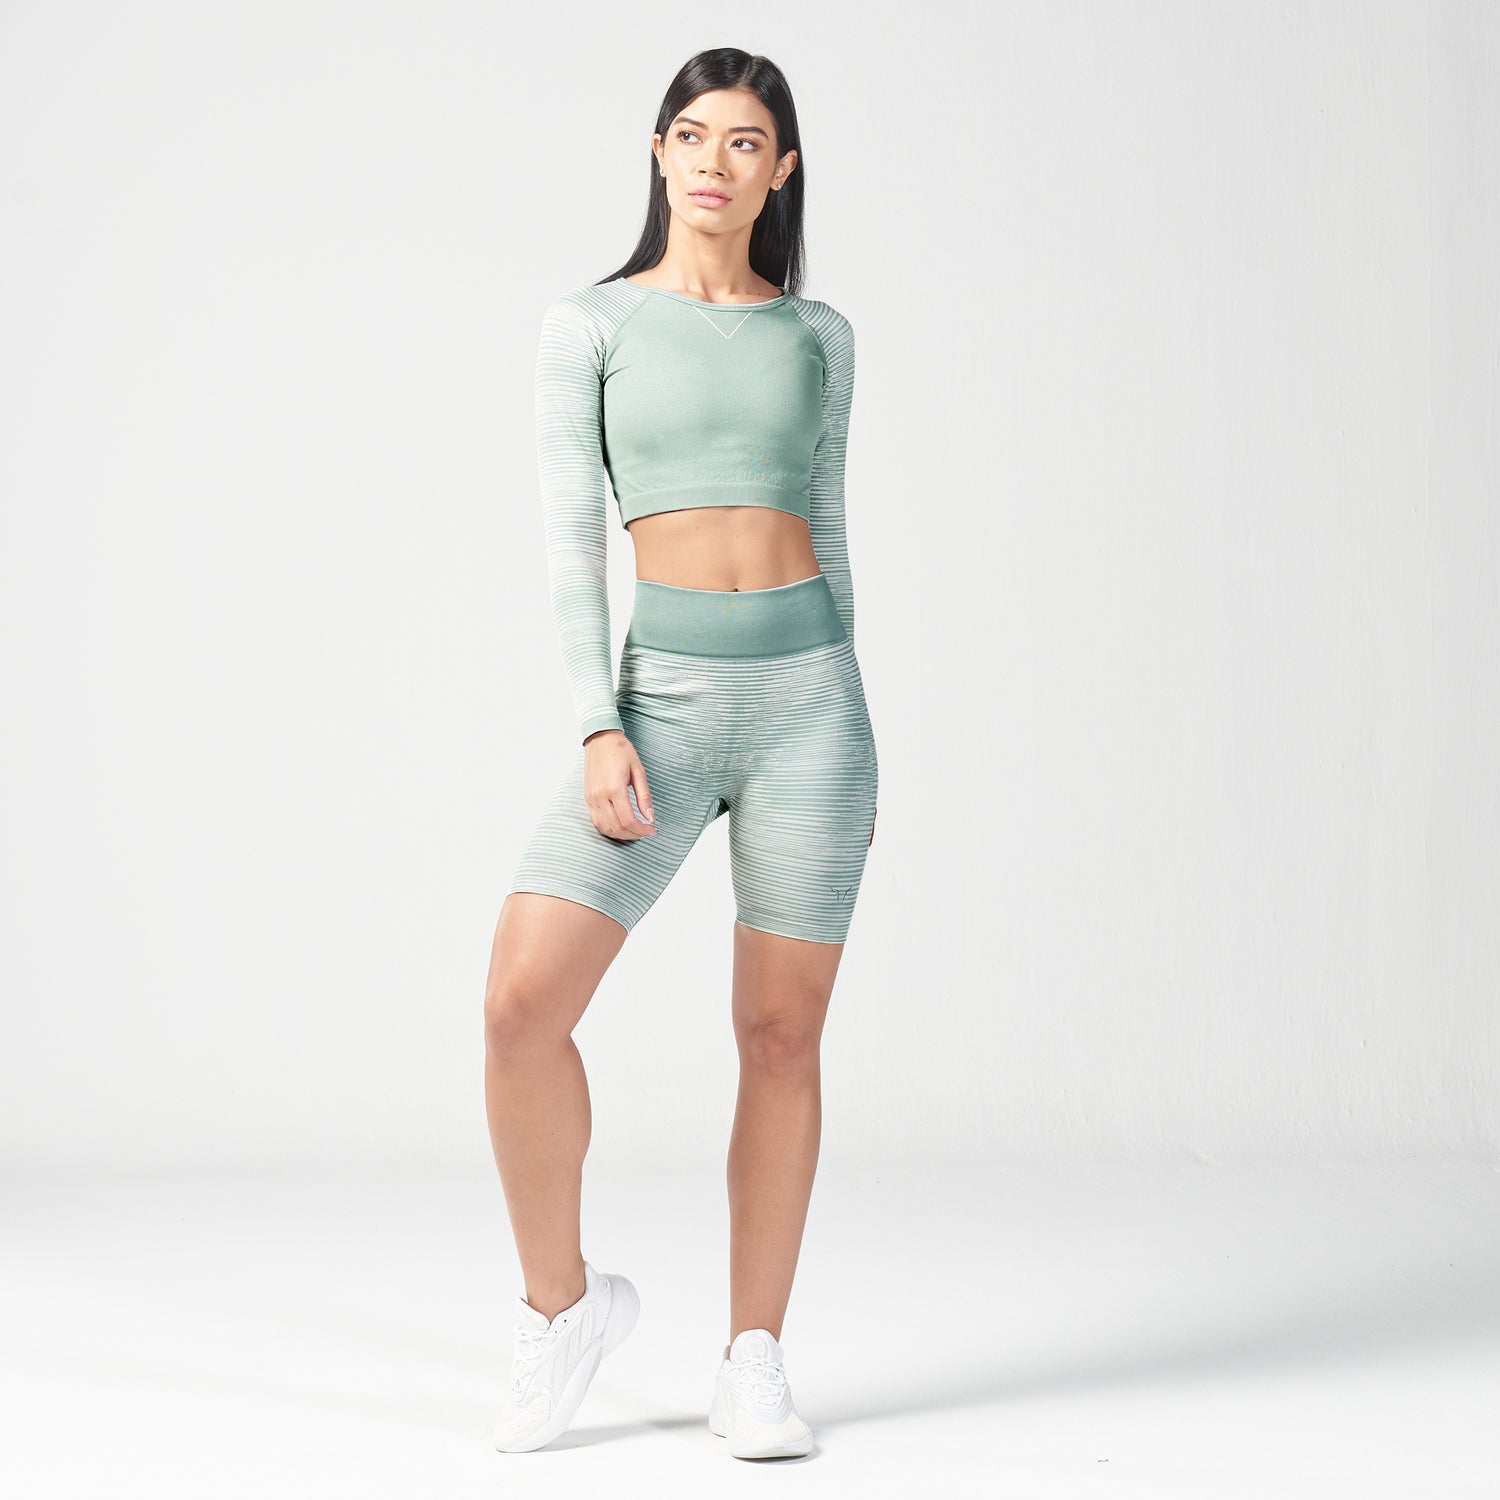 squatwolf-workout-clothes-infinity-stripe-seamless-crop-top-green-surf-gym-t-shirts-for-women